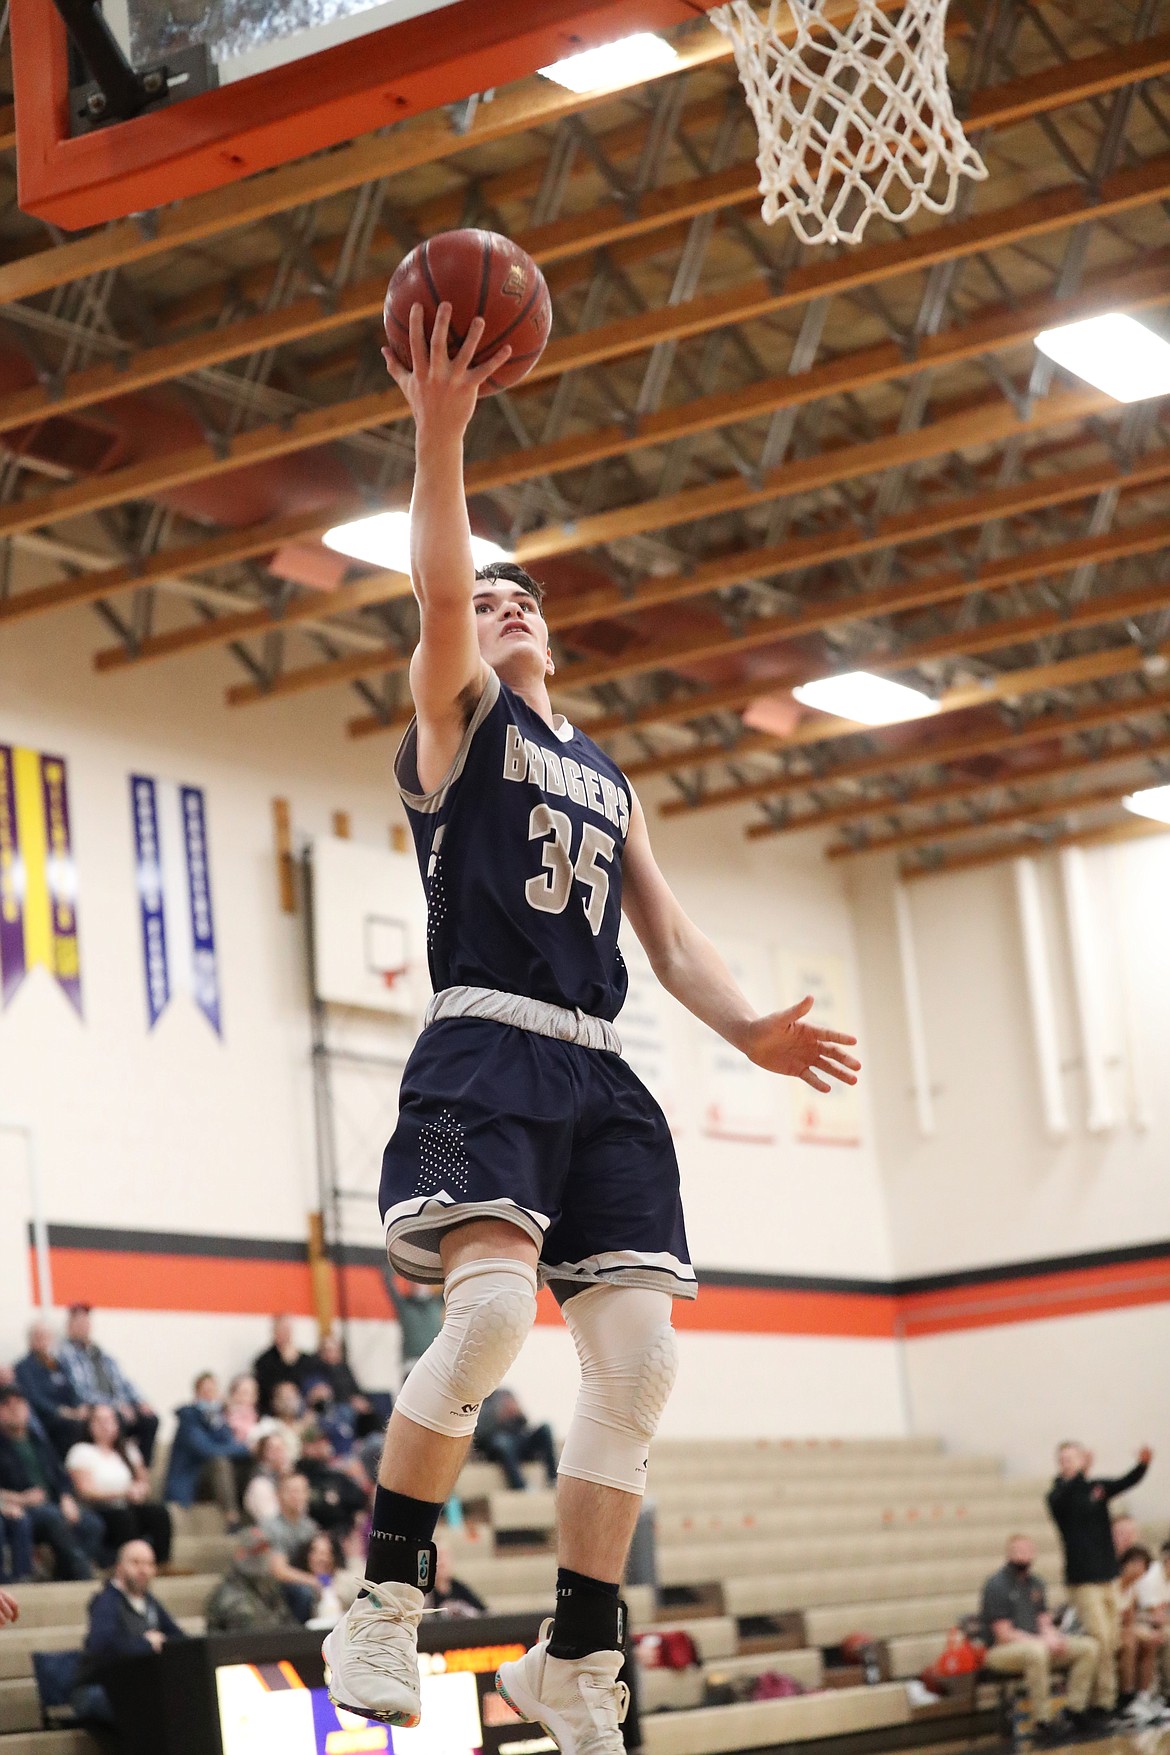 Sophomore Braeden Blackmore converts a layup for Bonners Ferry on Saturday.